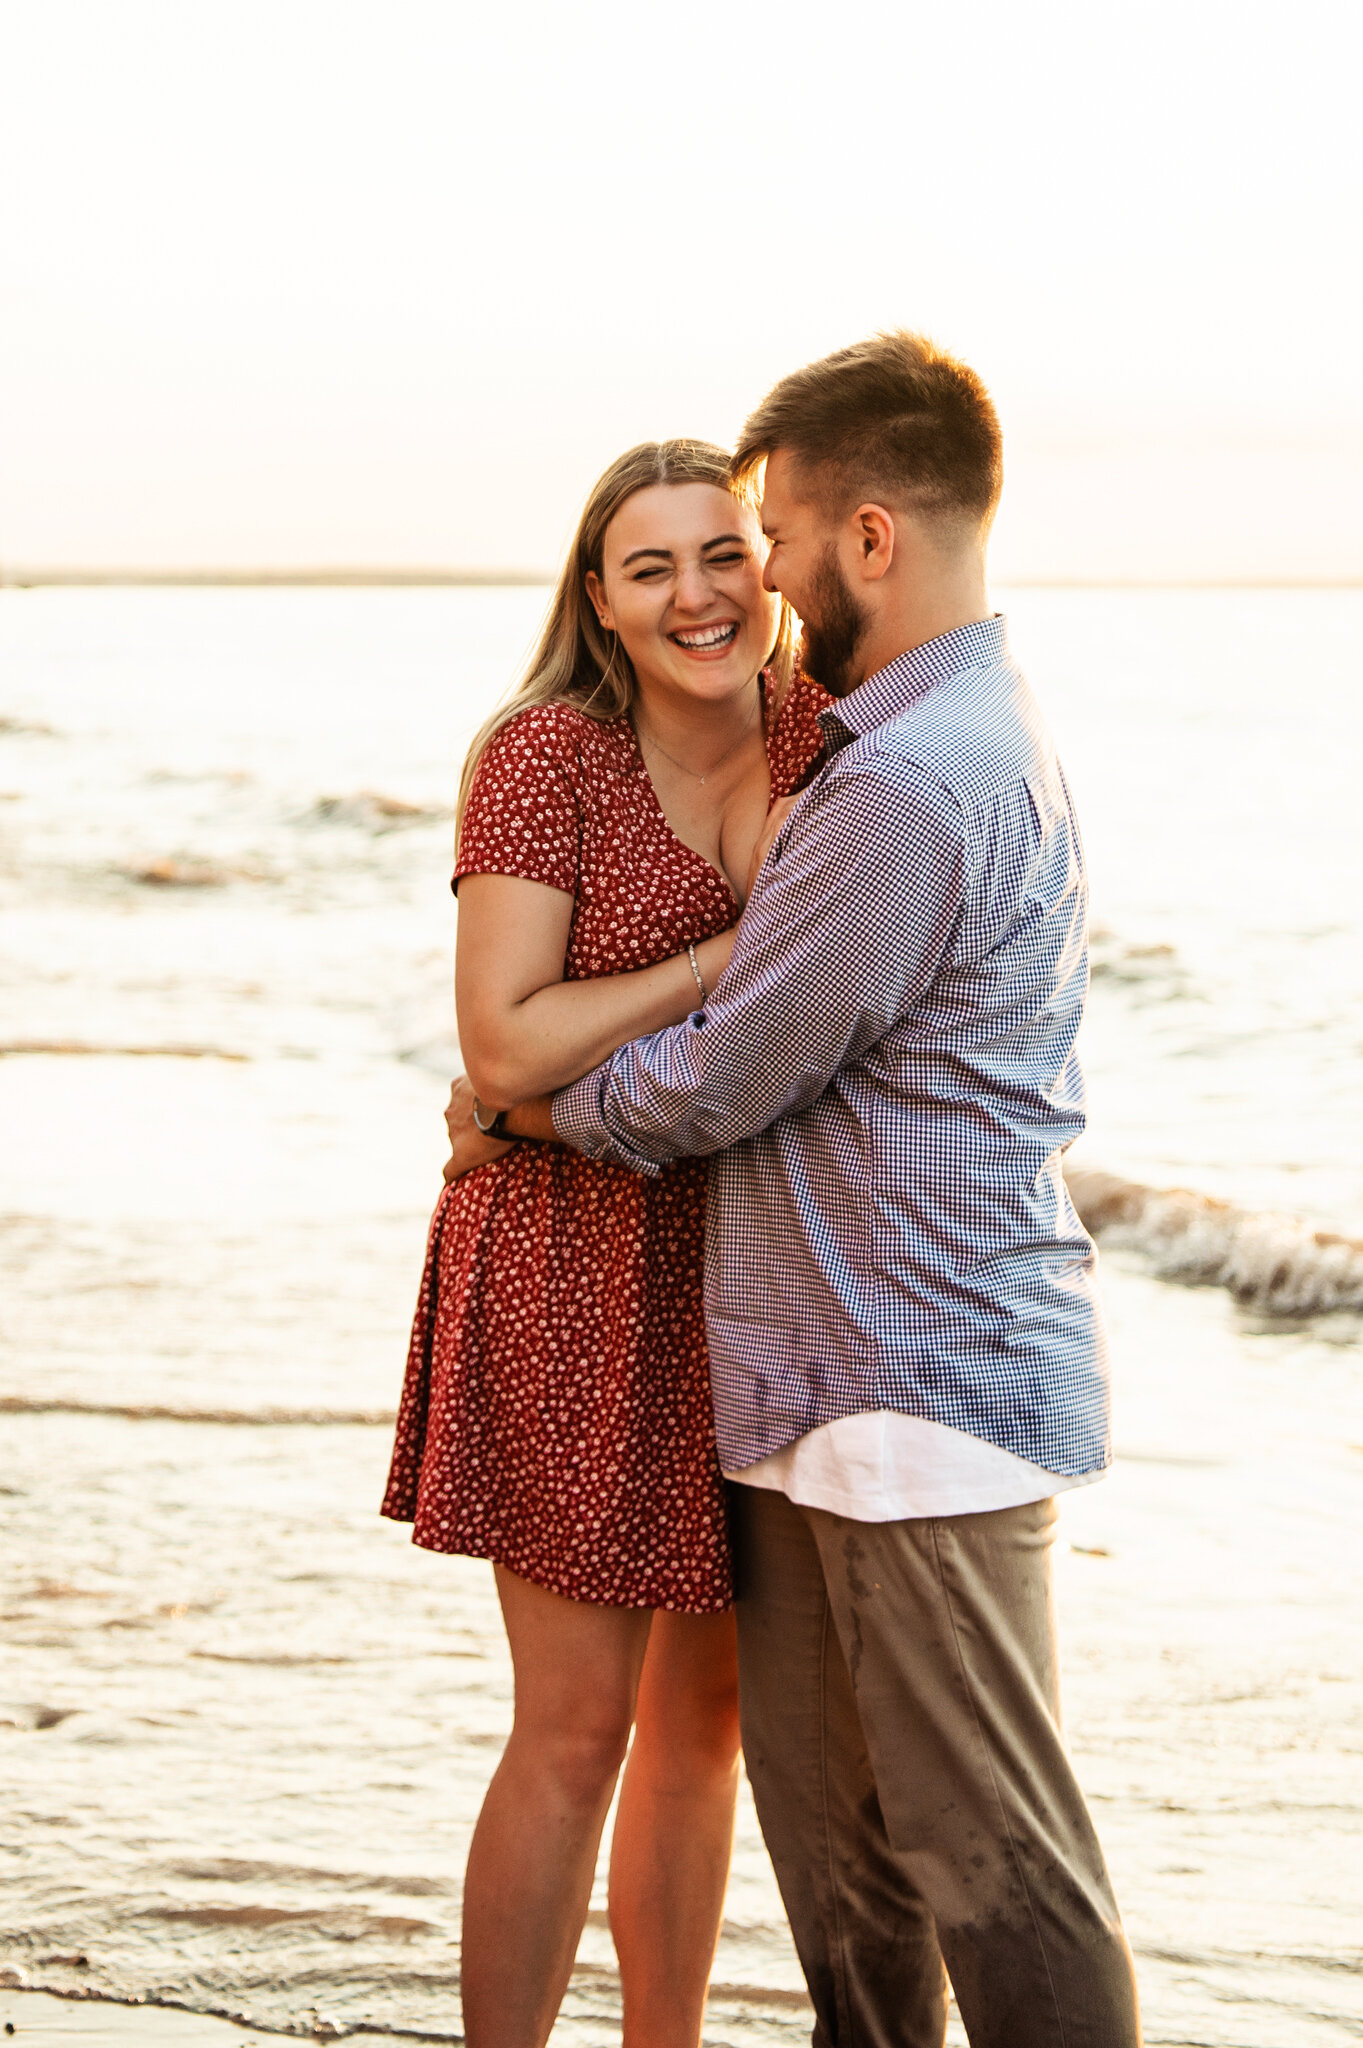 Chimney_Bluffs_State_Park_Rochester_Engagement_Session_JILL_STUDIO_Rochester_NY_Photographer_7125.jpg